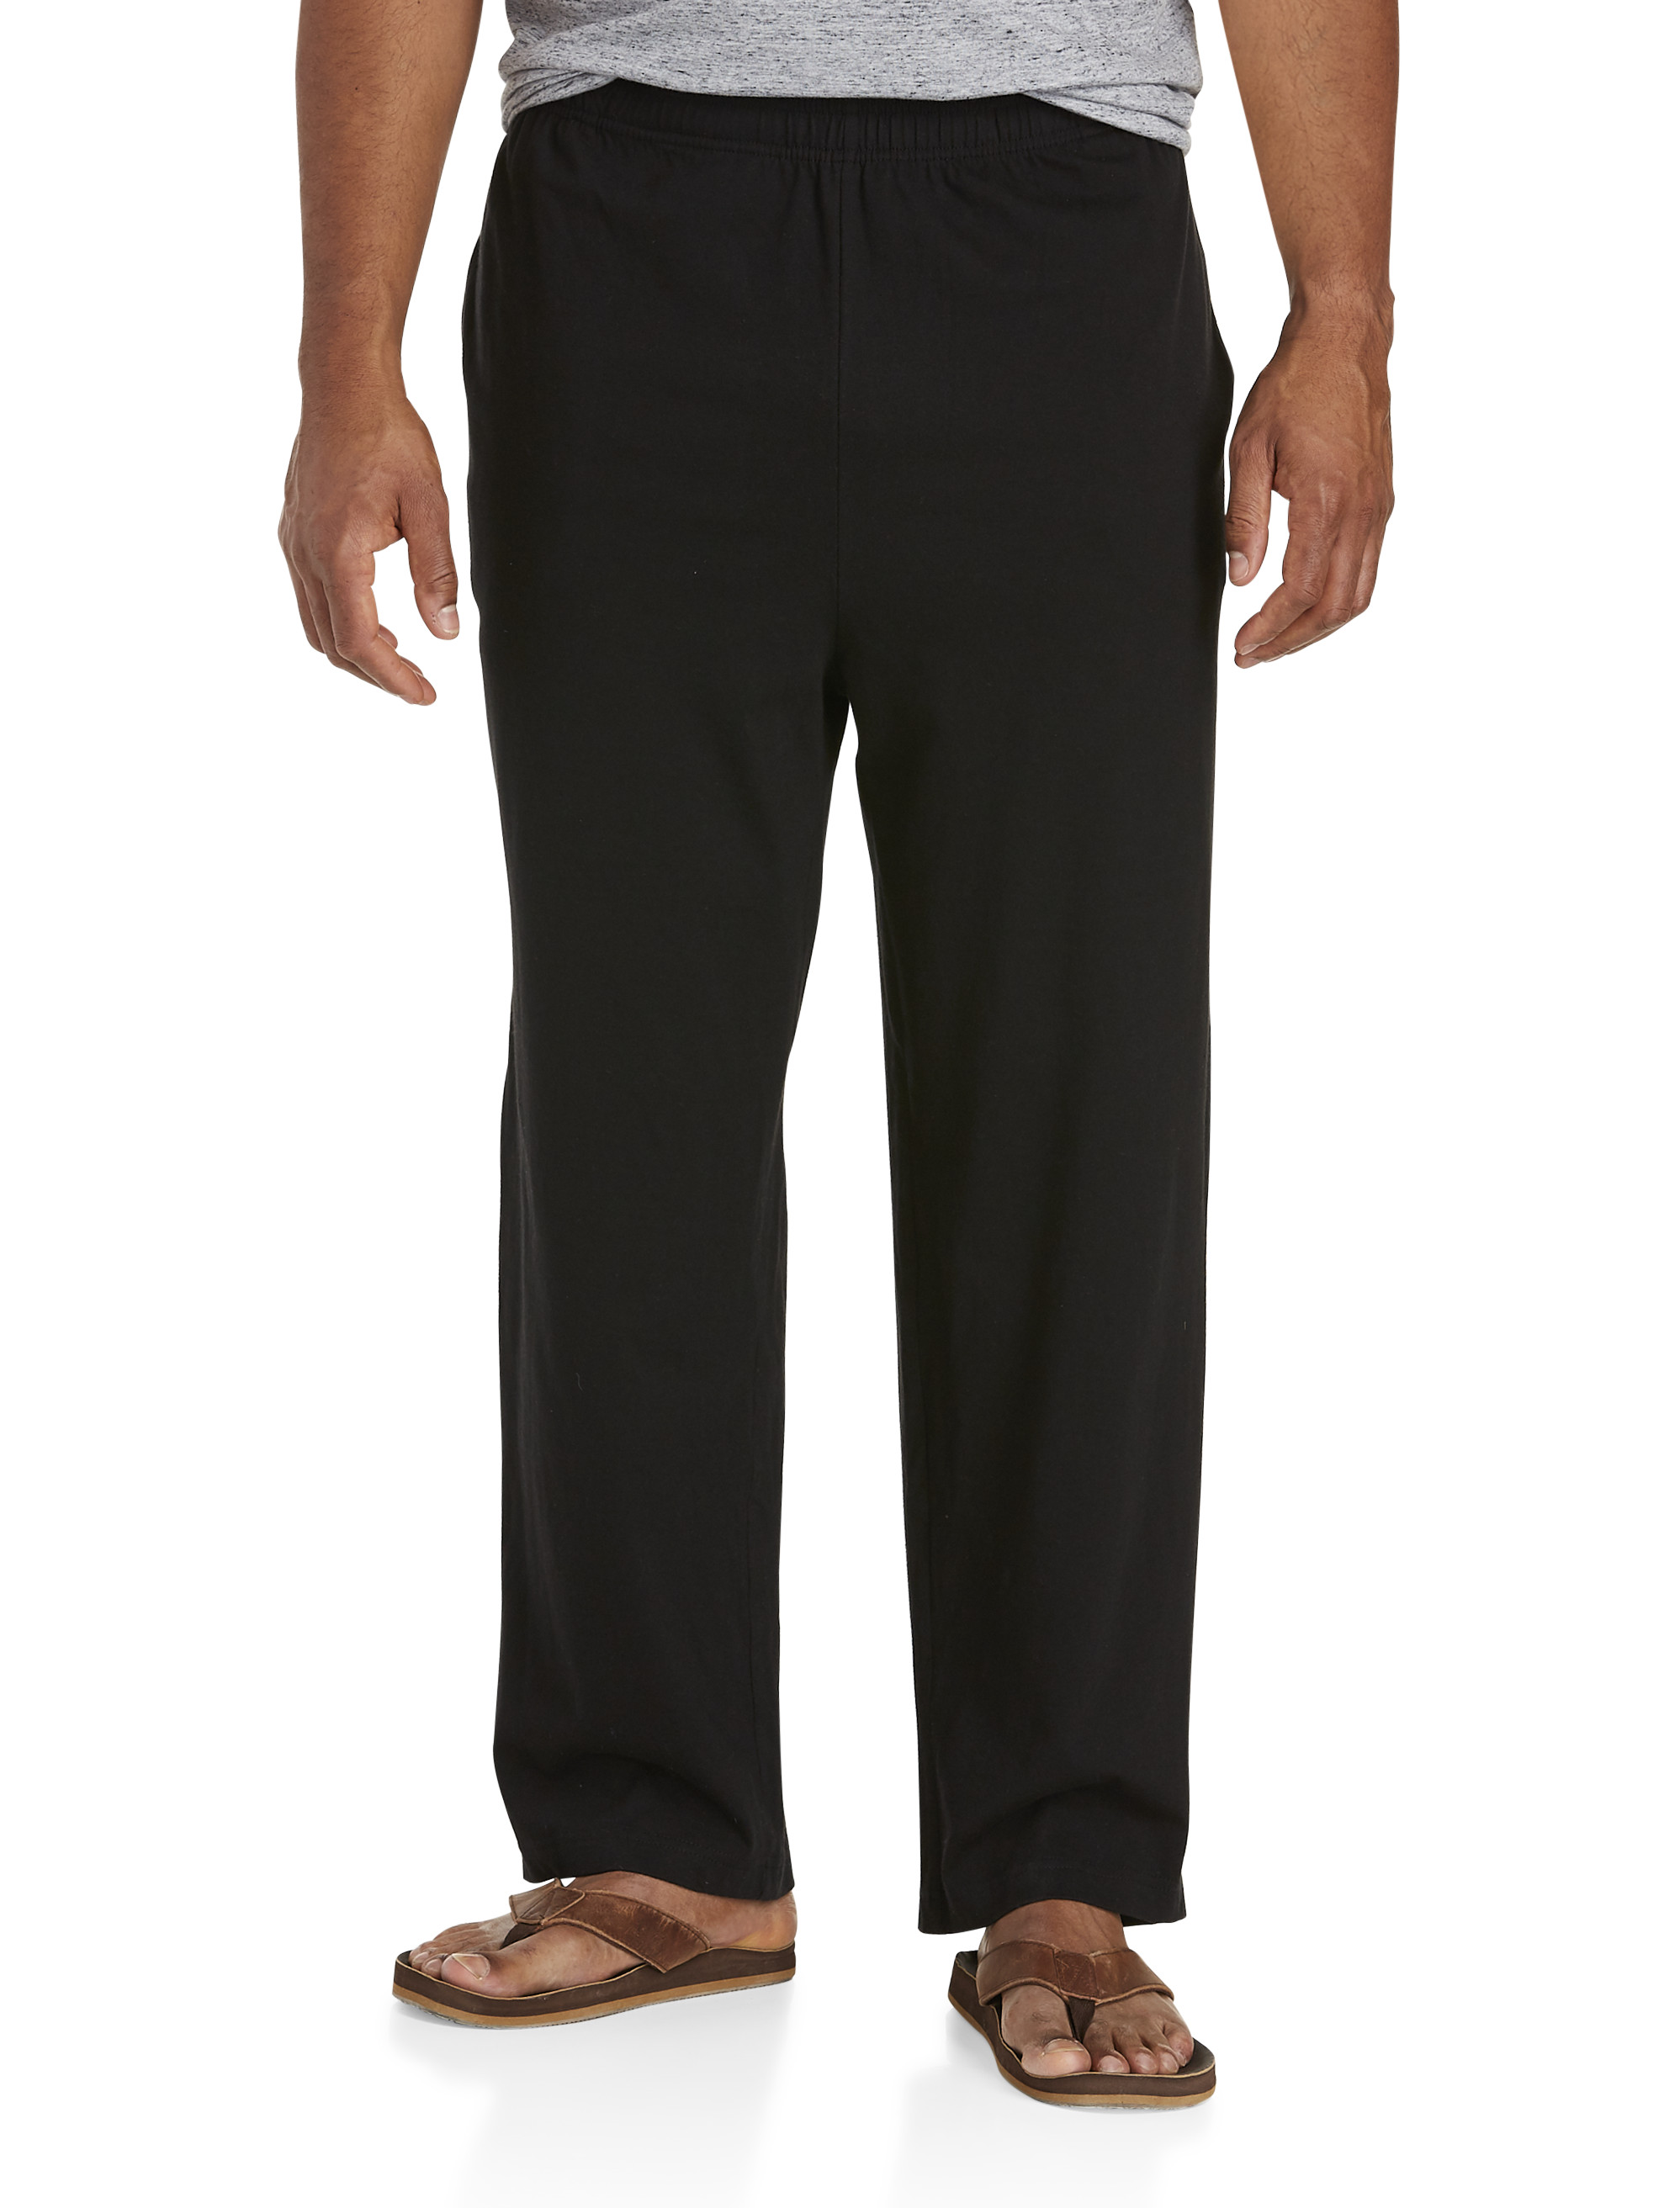 Big and Tall | Harbor Bay Open-Hemmed Jersey Pants | DXL Men's Clothing ...